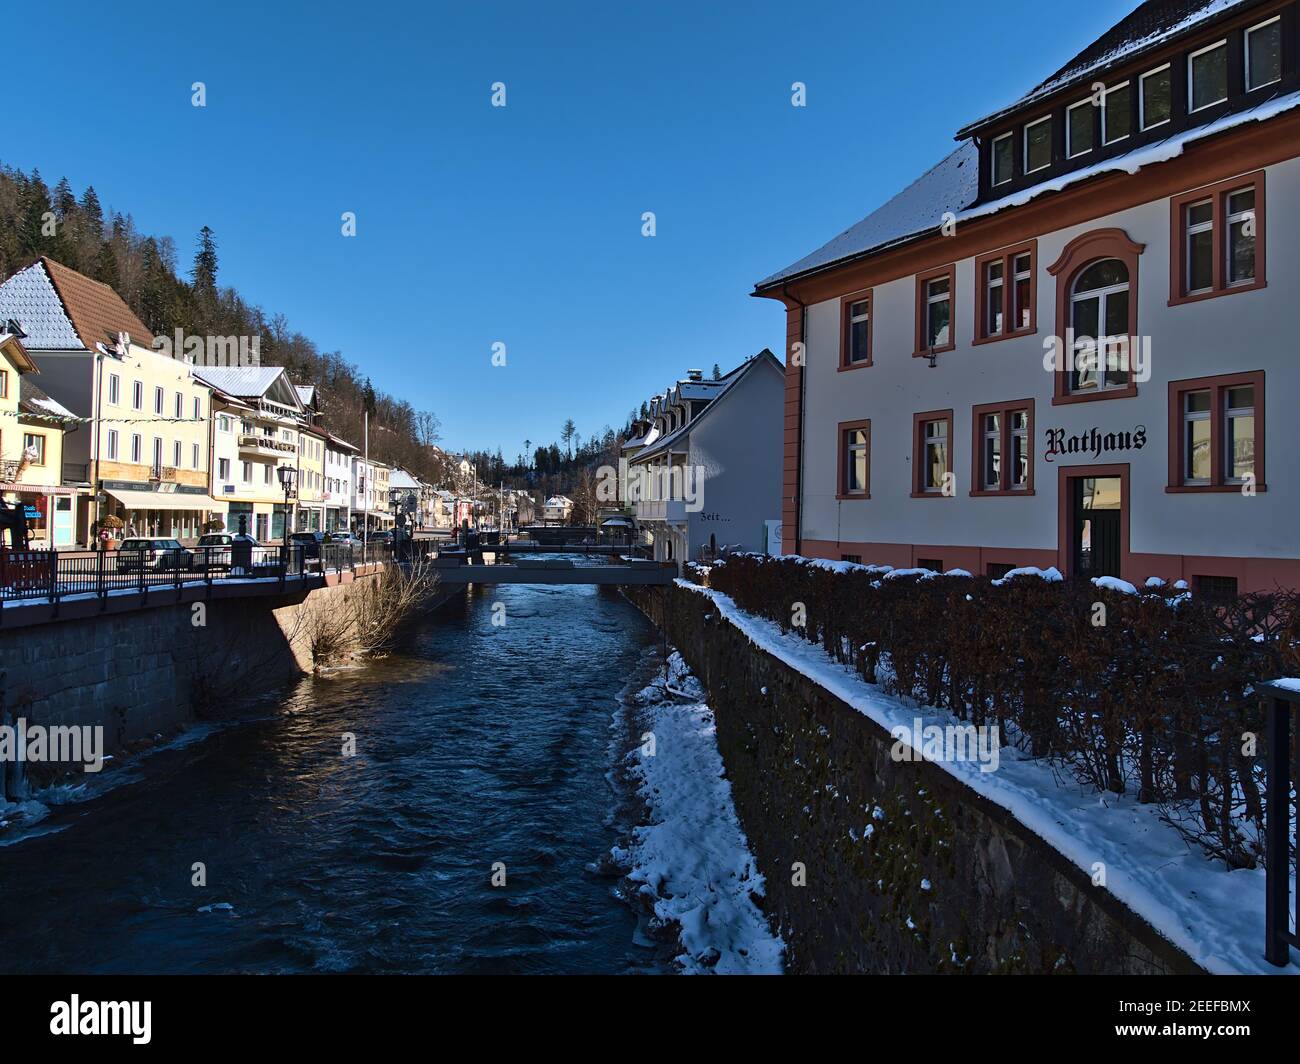 View of historic town center with river Alb and town hall ('Rathaus', right) in winter season with snow and ice on sunny day. Stock Photo